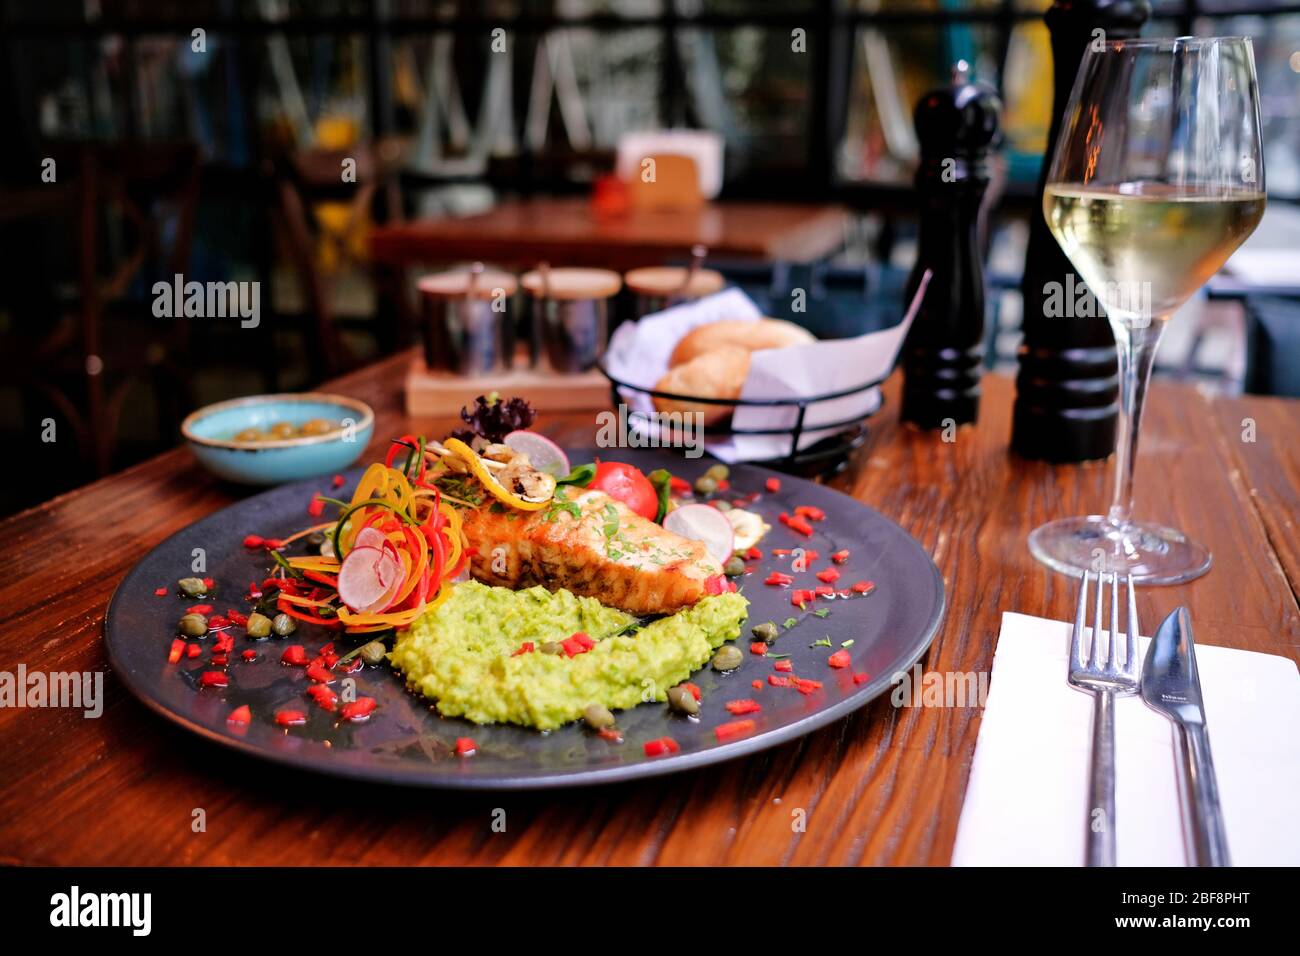 Chicken with specially crafted avocado sauce accompanied by white wine Stock Photo